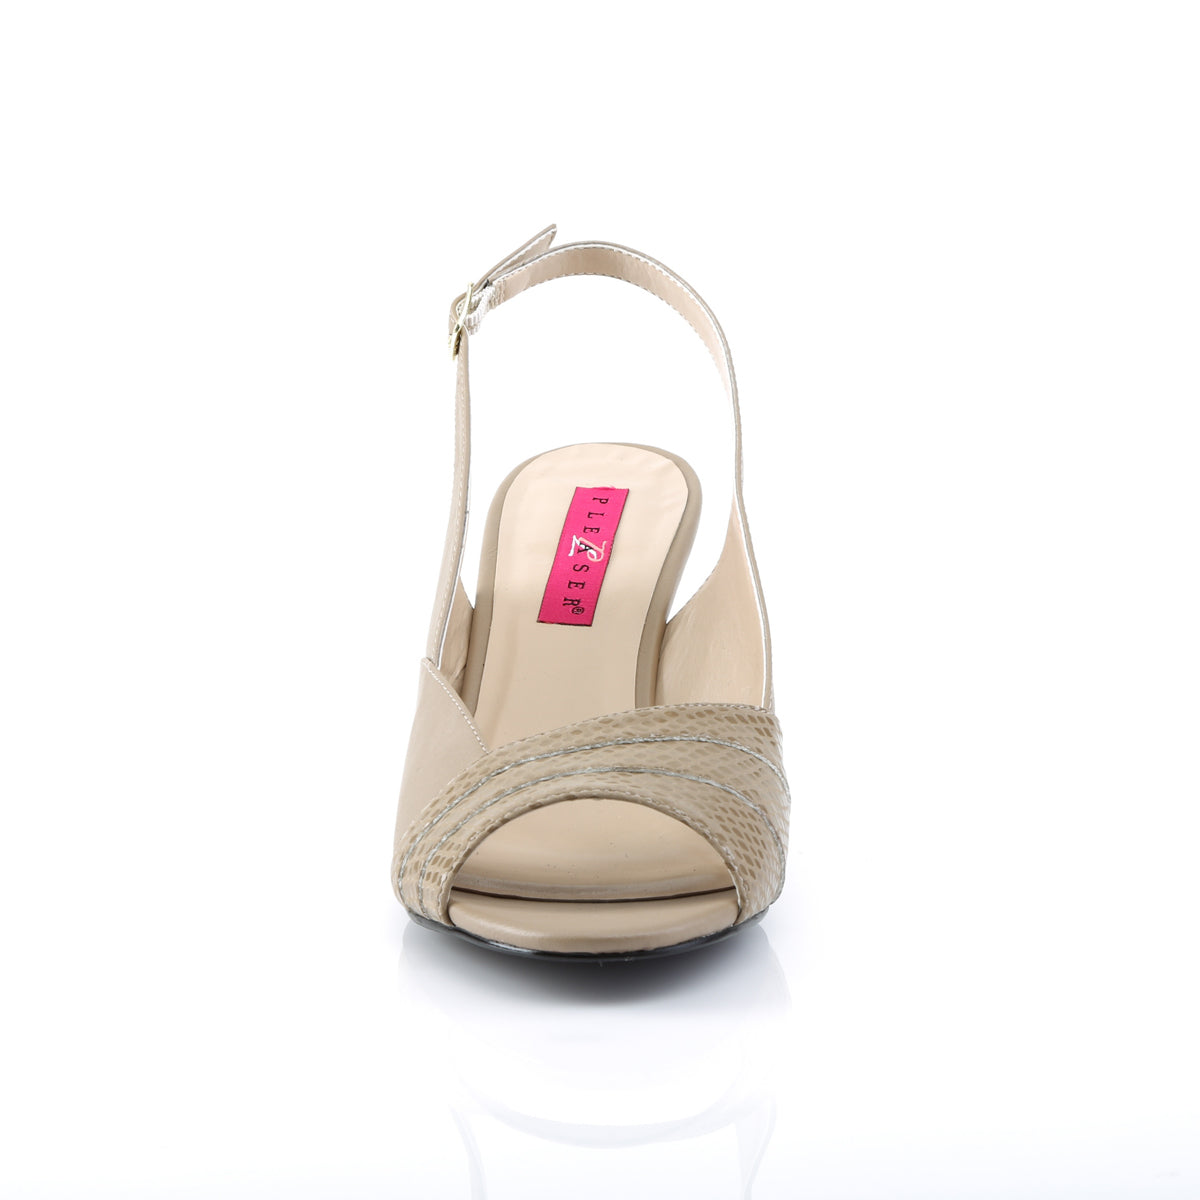 Pleaser Pink Label Bombas para mujer KIMBERLY-01sp Taupe Faux Cuero